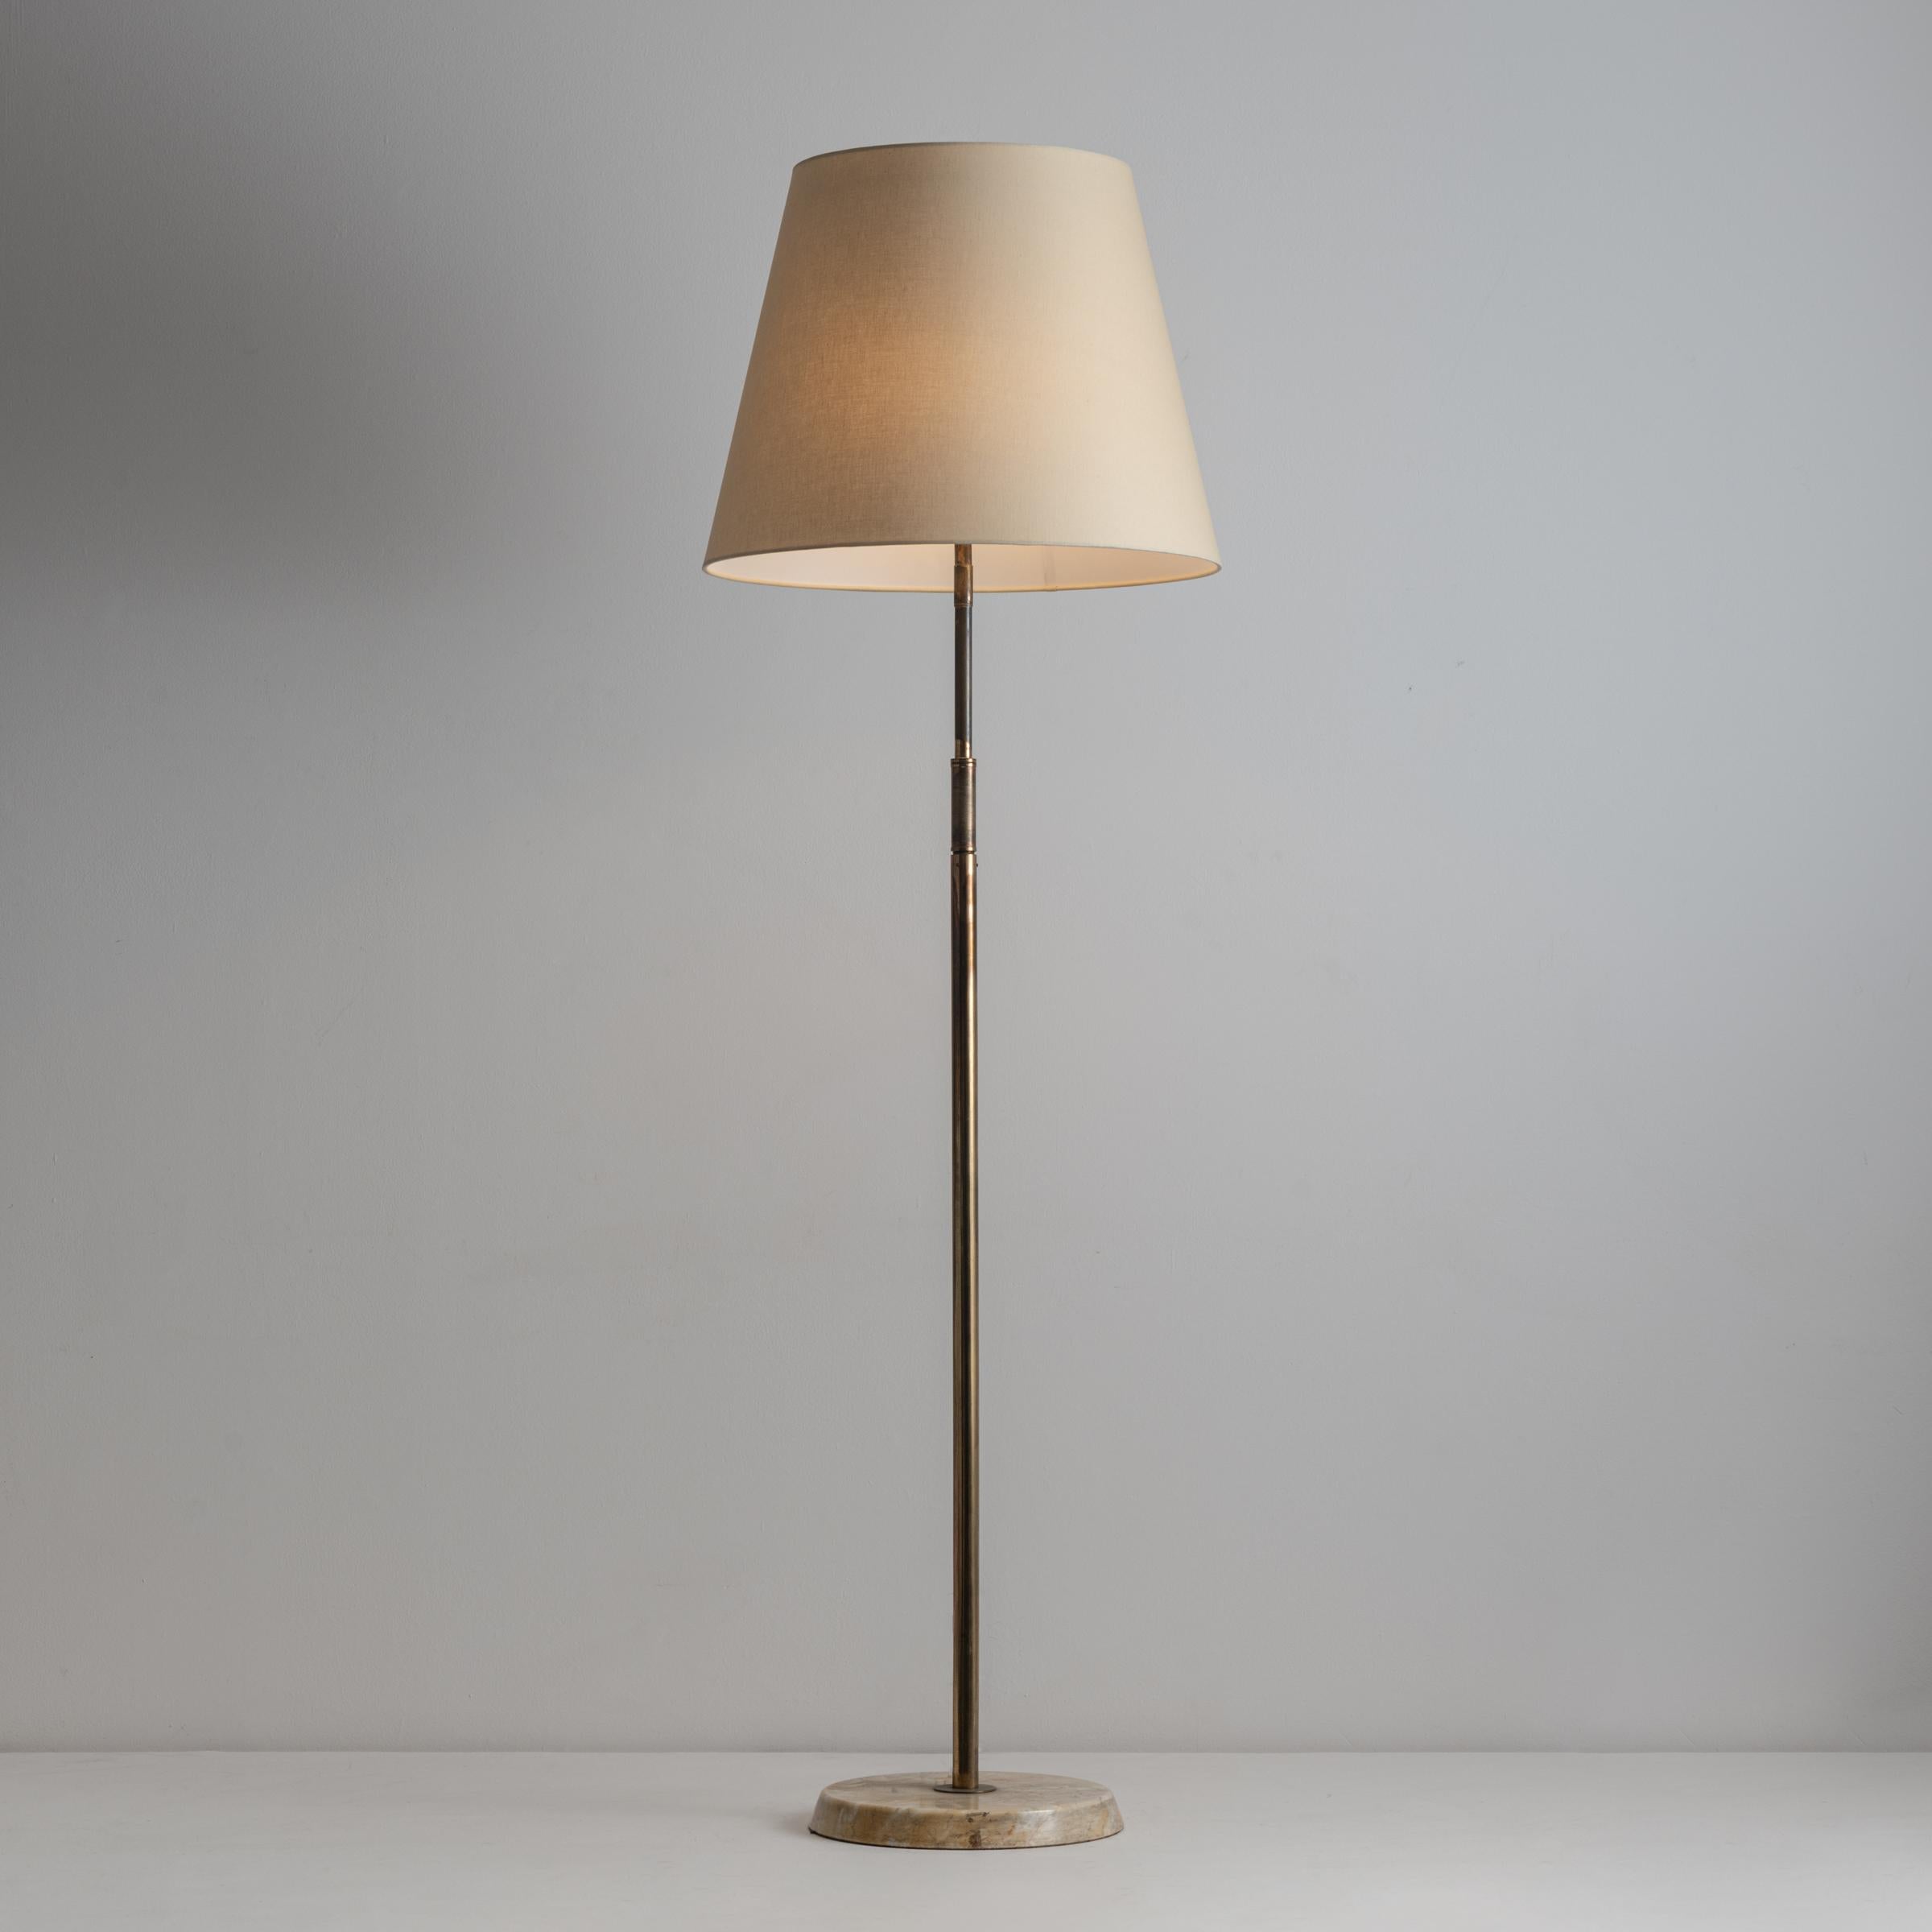 Tris Floor lamp by Angelo Lelli. Designed and manufactured in Italy, circa 1950's. Abalone, brass, custom linen shade. Recommended Lamping: 120v - 3 Qty E27 Sockets w/ 60w Frosted Bulb, Bulbs not included. US Plug Measures: H: 99.5